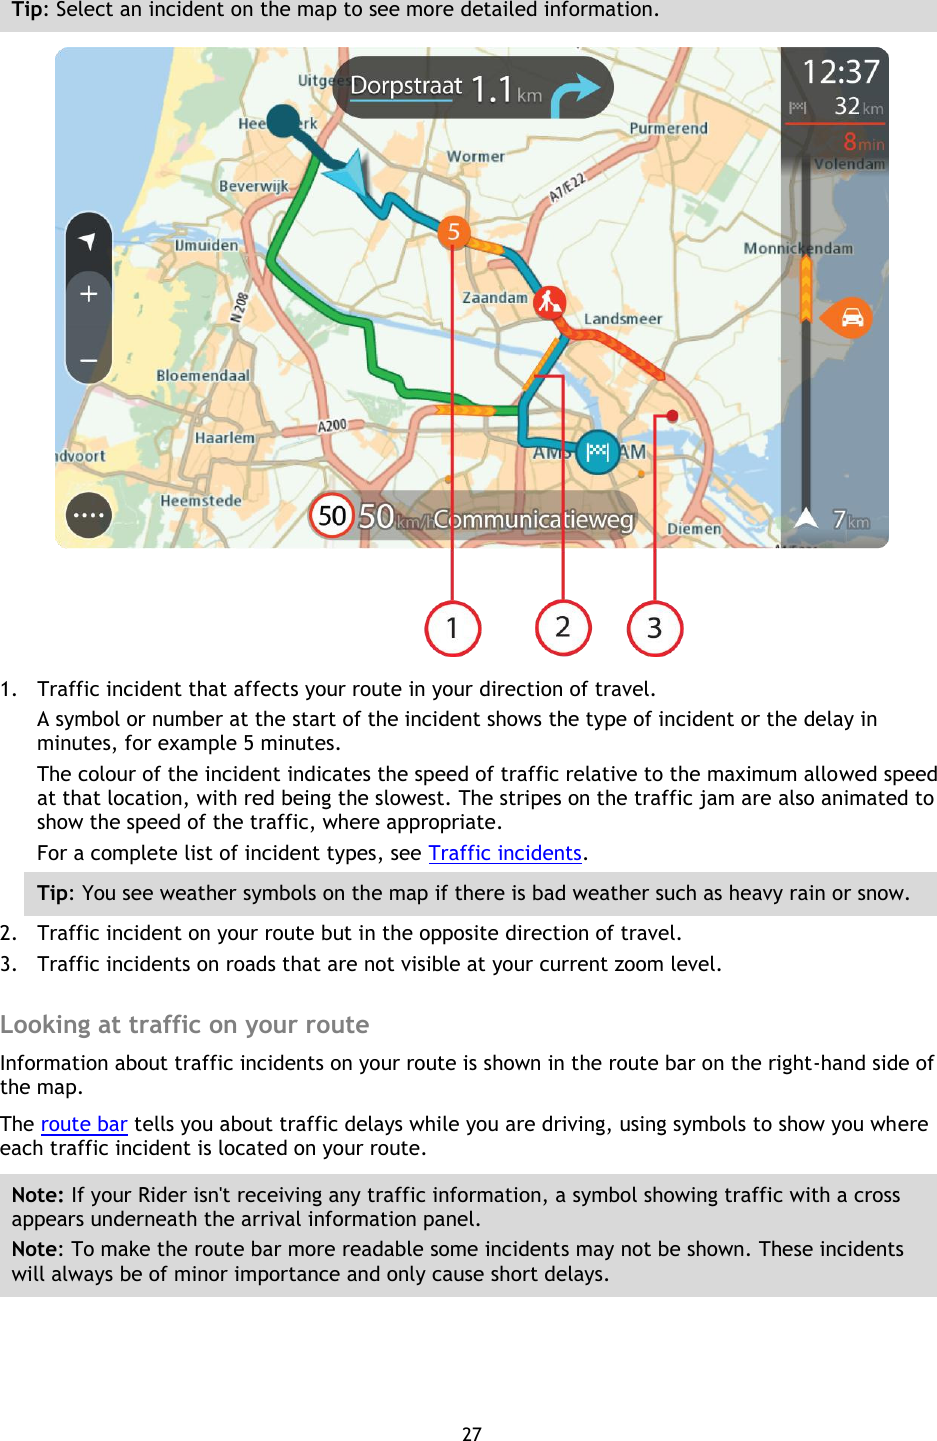 27    Tip: Select an incident on the map to see more detailed information.  1. Traffic incident that affects your route in your direction of travel. A symbol or number at the start of the incident shows the type of incident or the delay in minutes, for example 5 minutes.   The colour of the incident indicates the speed of traffic relative to the maximum allowed speed at that location, with red being the slowest. The stripes on the traffic jam are also animated to show the speed of the traffic, where appropriate.   For a complete list of incident types, see Traffic incidents. Tip: You see weather symbols on the map if there is bad weather such as heavy rain or snow.     2. Traffic incident on your route but in the opposite direction of travel. 3. Traffic incidents on roads that are not visible at your current zoom level.  Looking at traffic on your route Information about traffic incidents on your route is shown in the route bar on the right-hand side of the map. The route bar tells you about traffic delays while you are driving, using symbols to show you where each traffic incident is located on your route. Note: If your Rider isn&apos;t receiving any traffic information, a symbol showing traffic with a cross appears underneath the arrival information panel. Note: To make the route bar more readable some incidents may not be shown. These incidents will always be of minor importance and only cause short delays. 